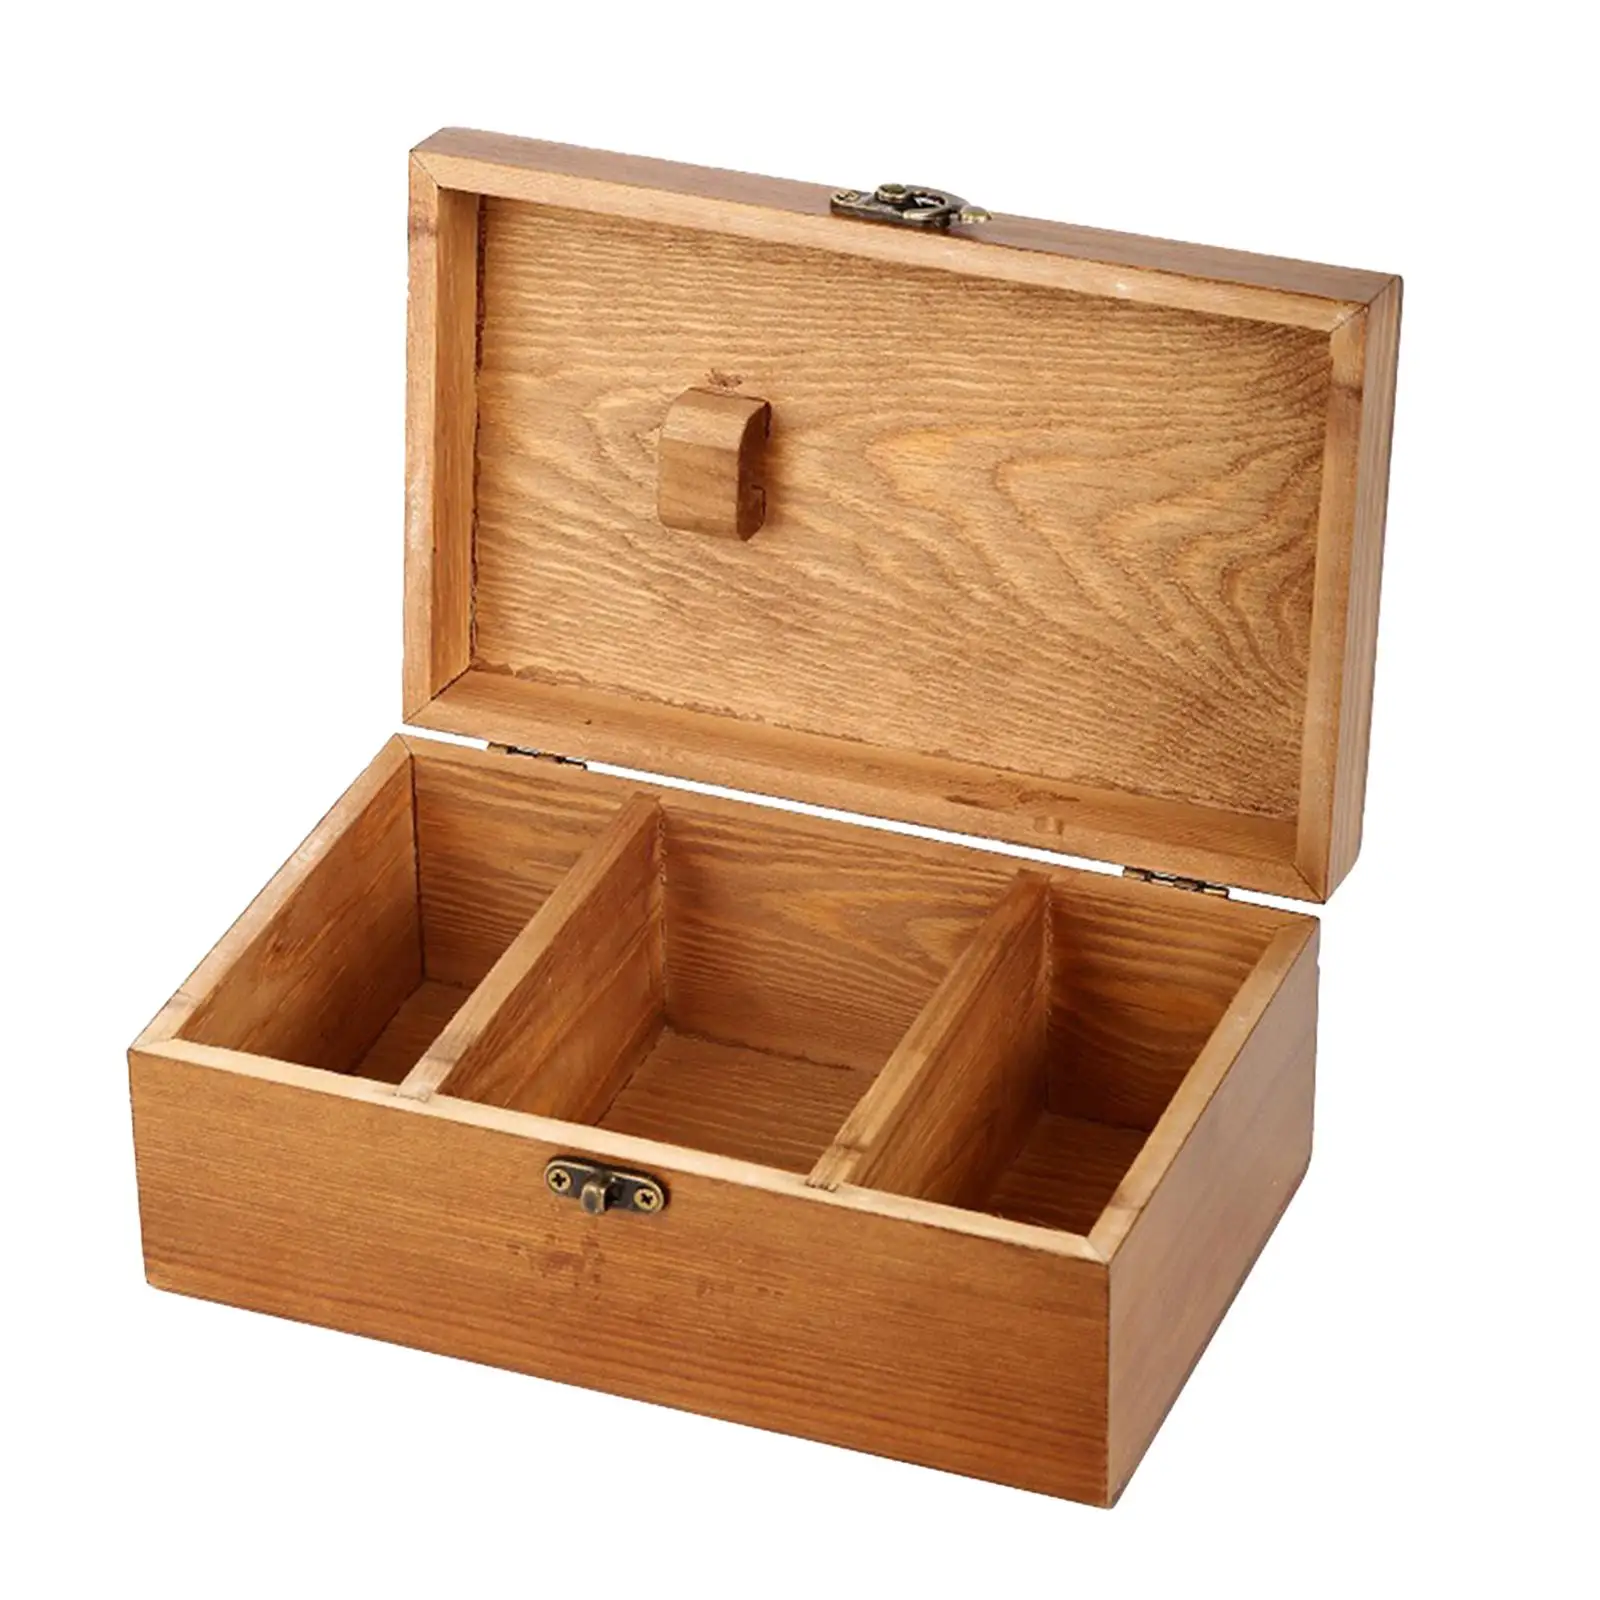 Wooden Sewing Box Empty Box Vintage for Yarn Needle Buttons Needlework Sewing Tools Household DIY Home Travel Needlework Box